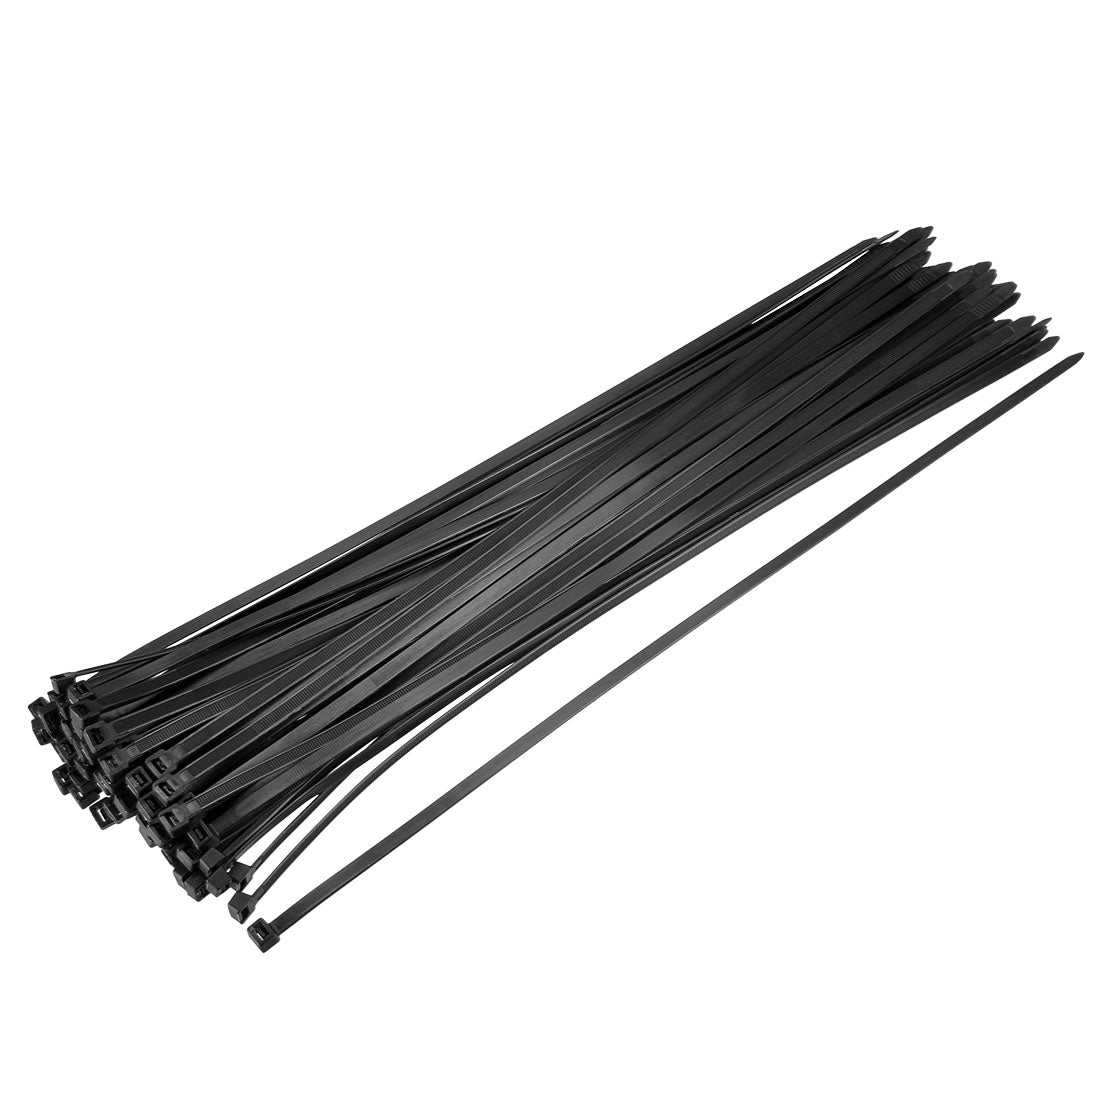 uxcell Uxcell Cable Zip Ties 250mmx3.3mm Self-Locking Nylon Tie Wraps Black 150pcs